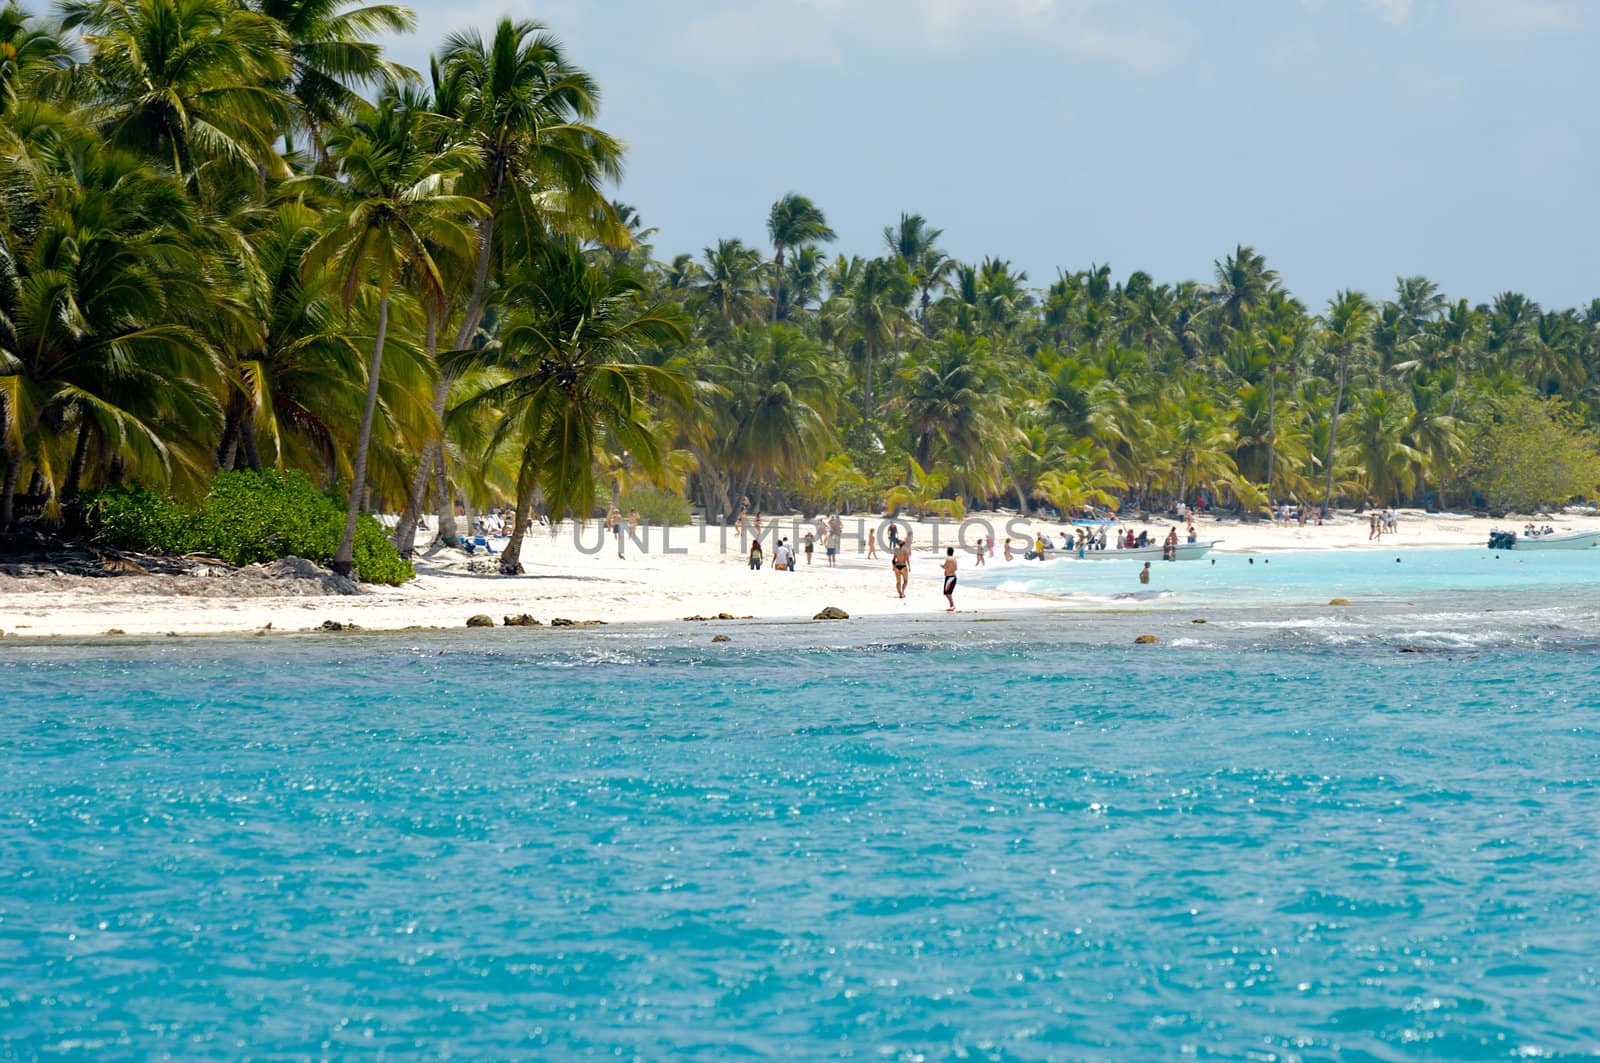 Caribbean island with a nice beach and green palms. The picture of the beach is taken from a boat on sea.